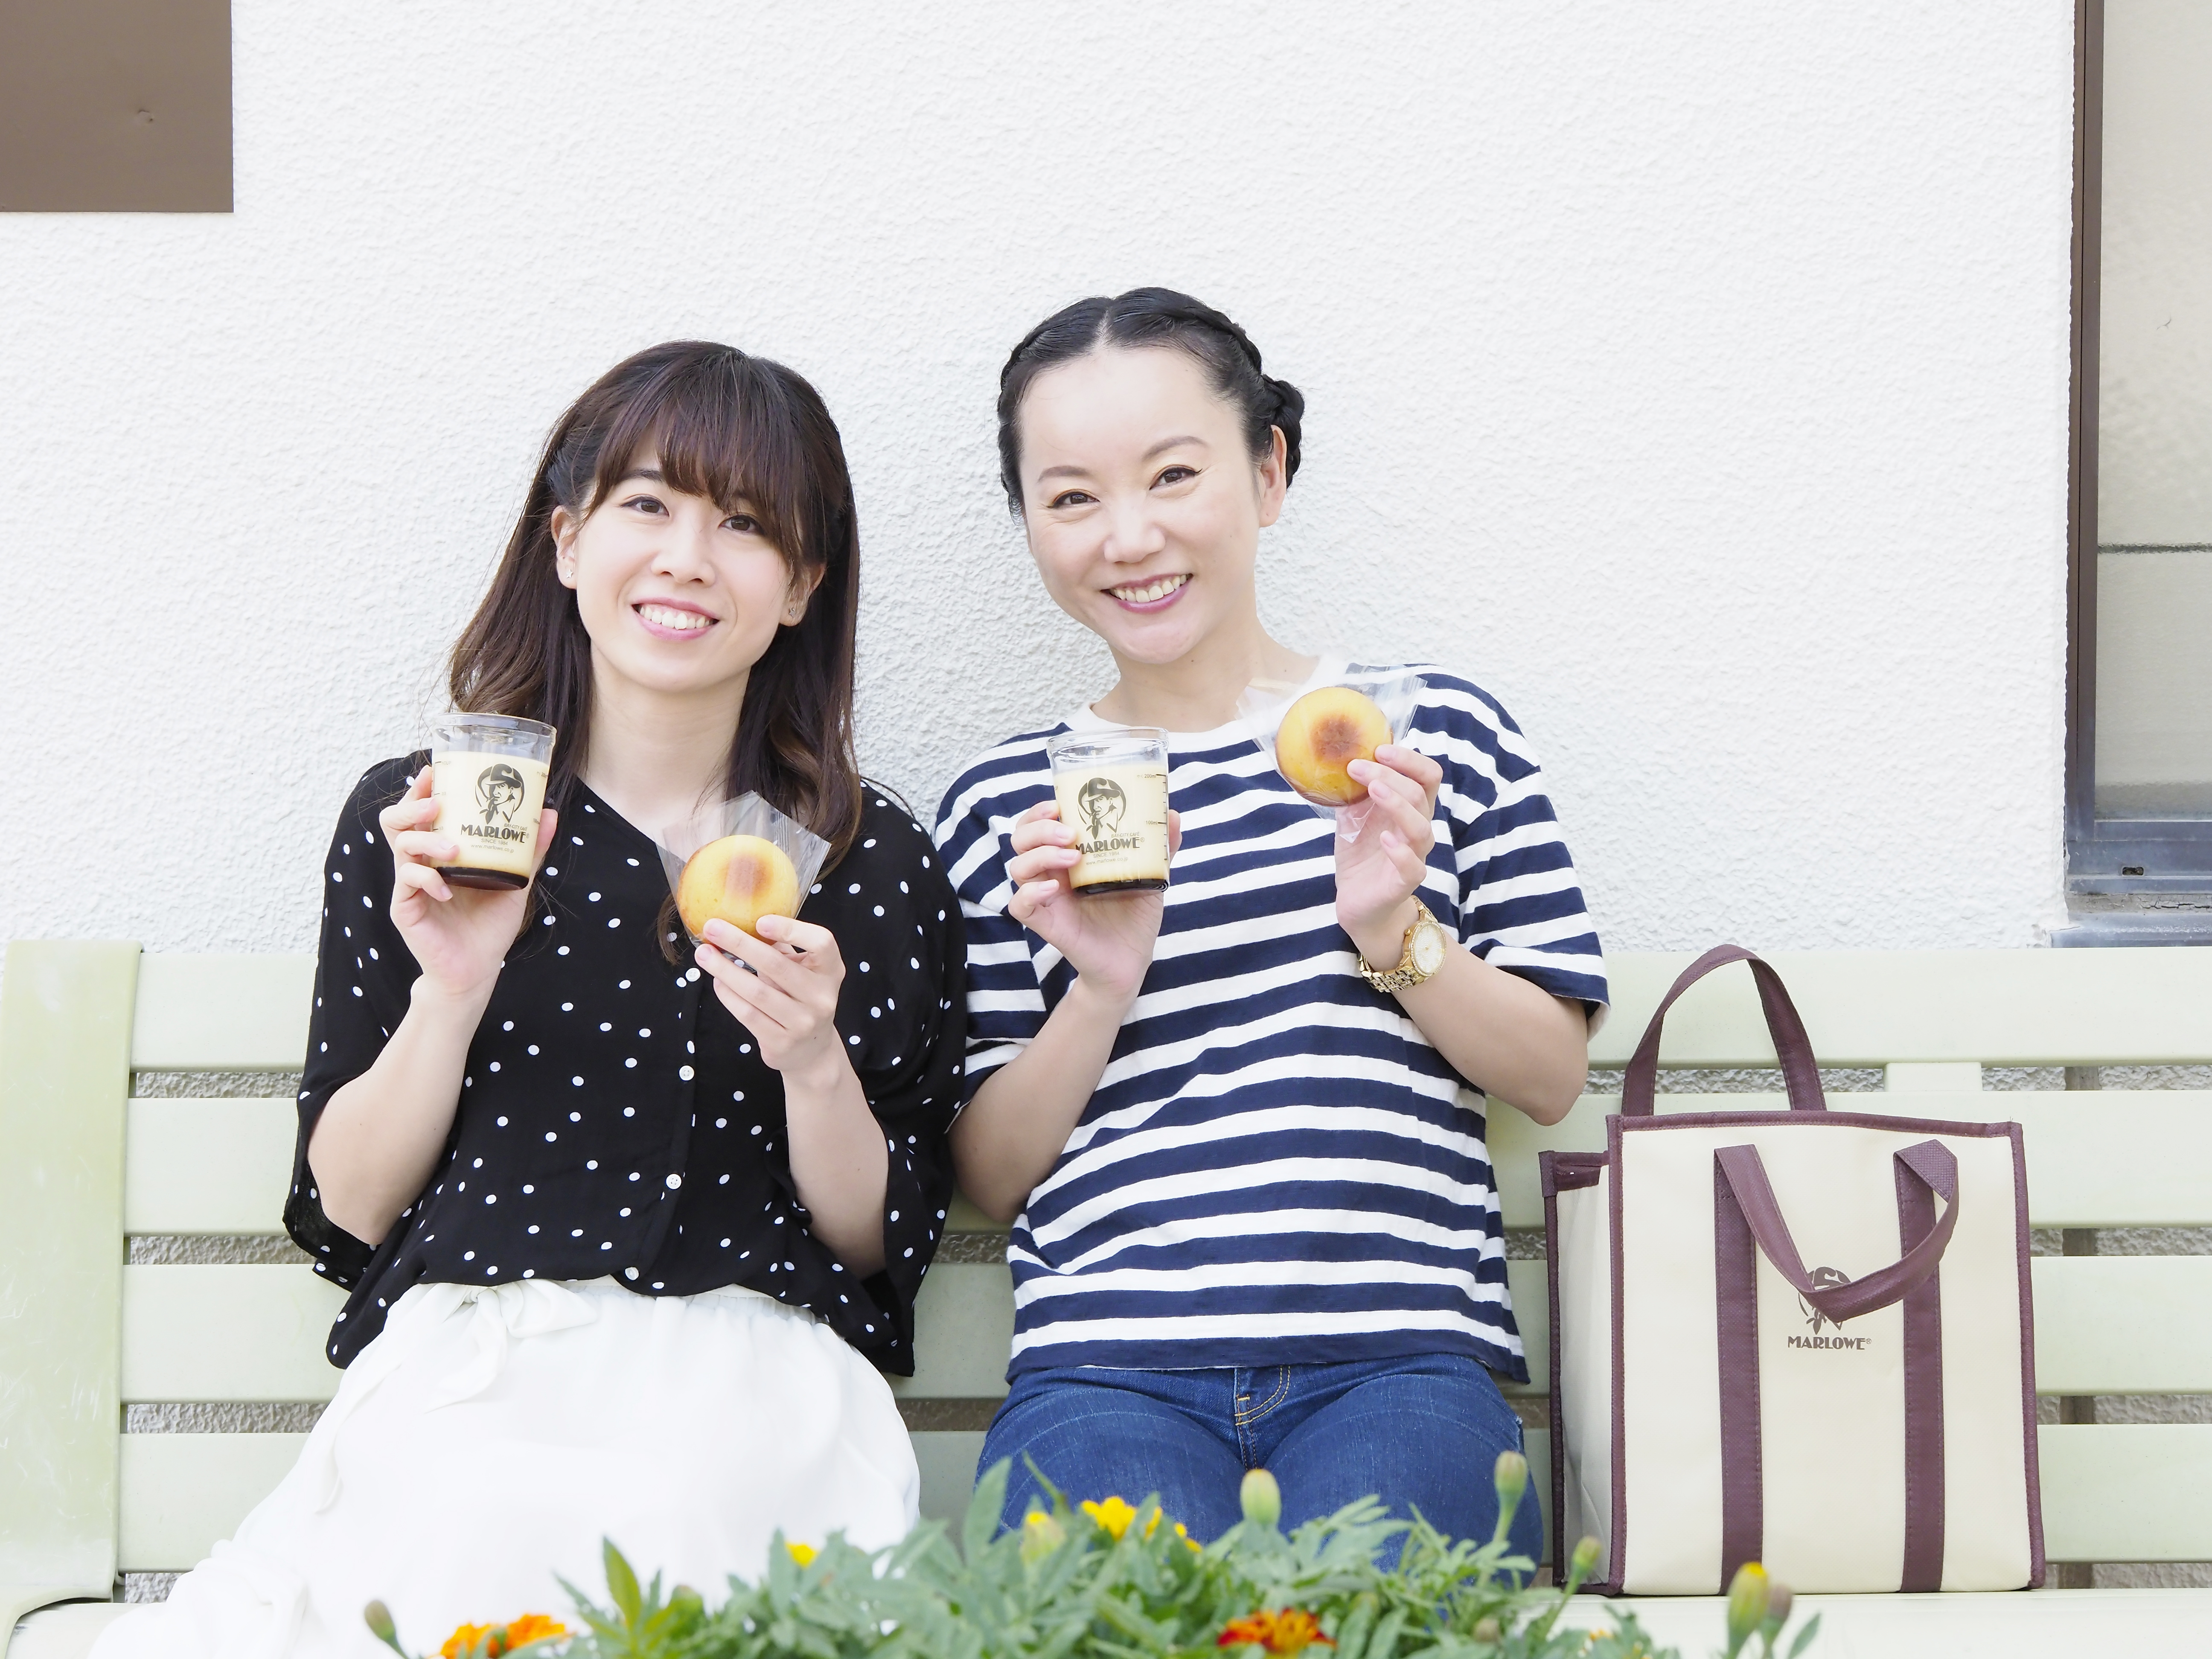 Recommended snacks and souvenirs in Hayama